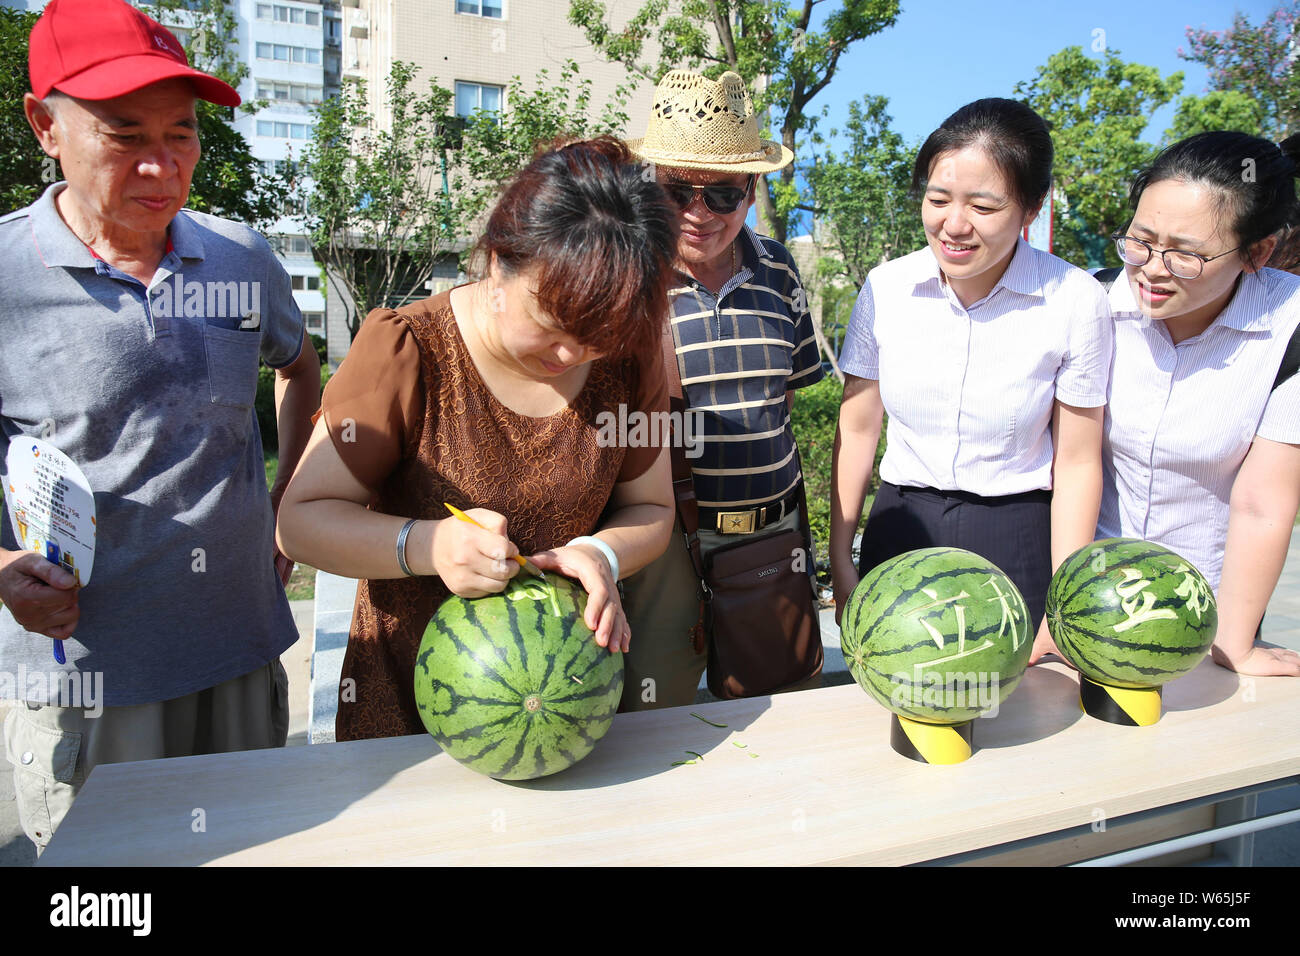 Chinese citizens take part in watermelon-themed games to mark Liqiu, meaning the start of autumn, one of the traditional 24 solar terms, at a resident Stock Photo